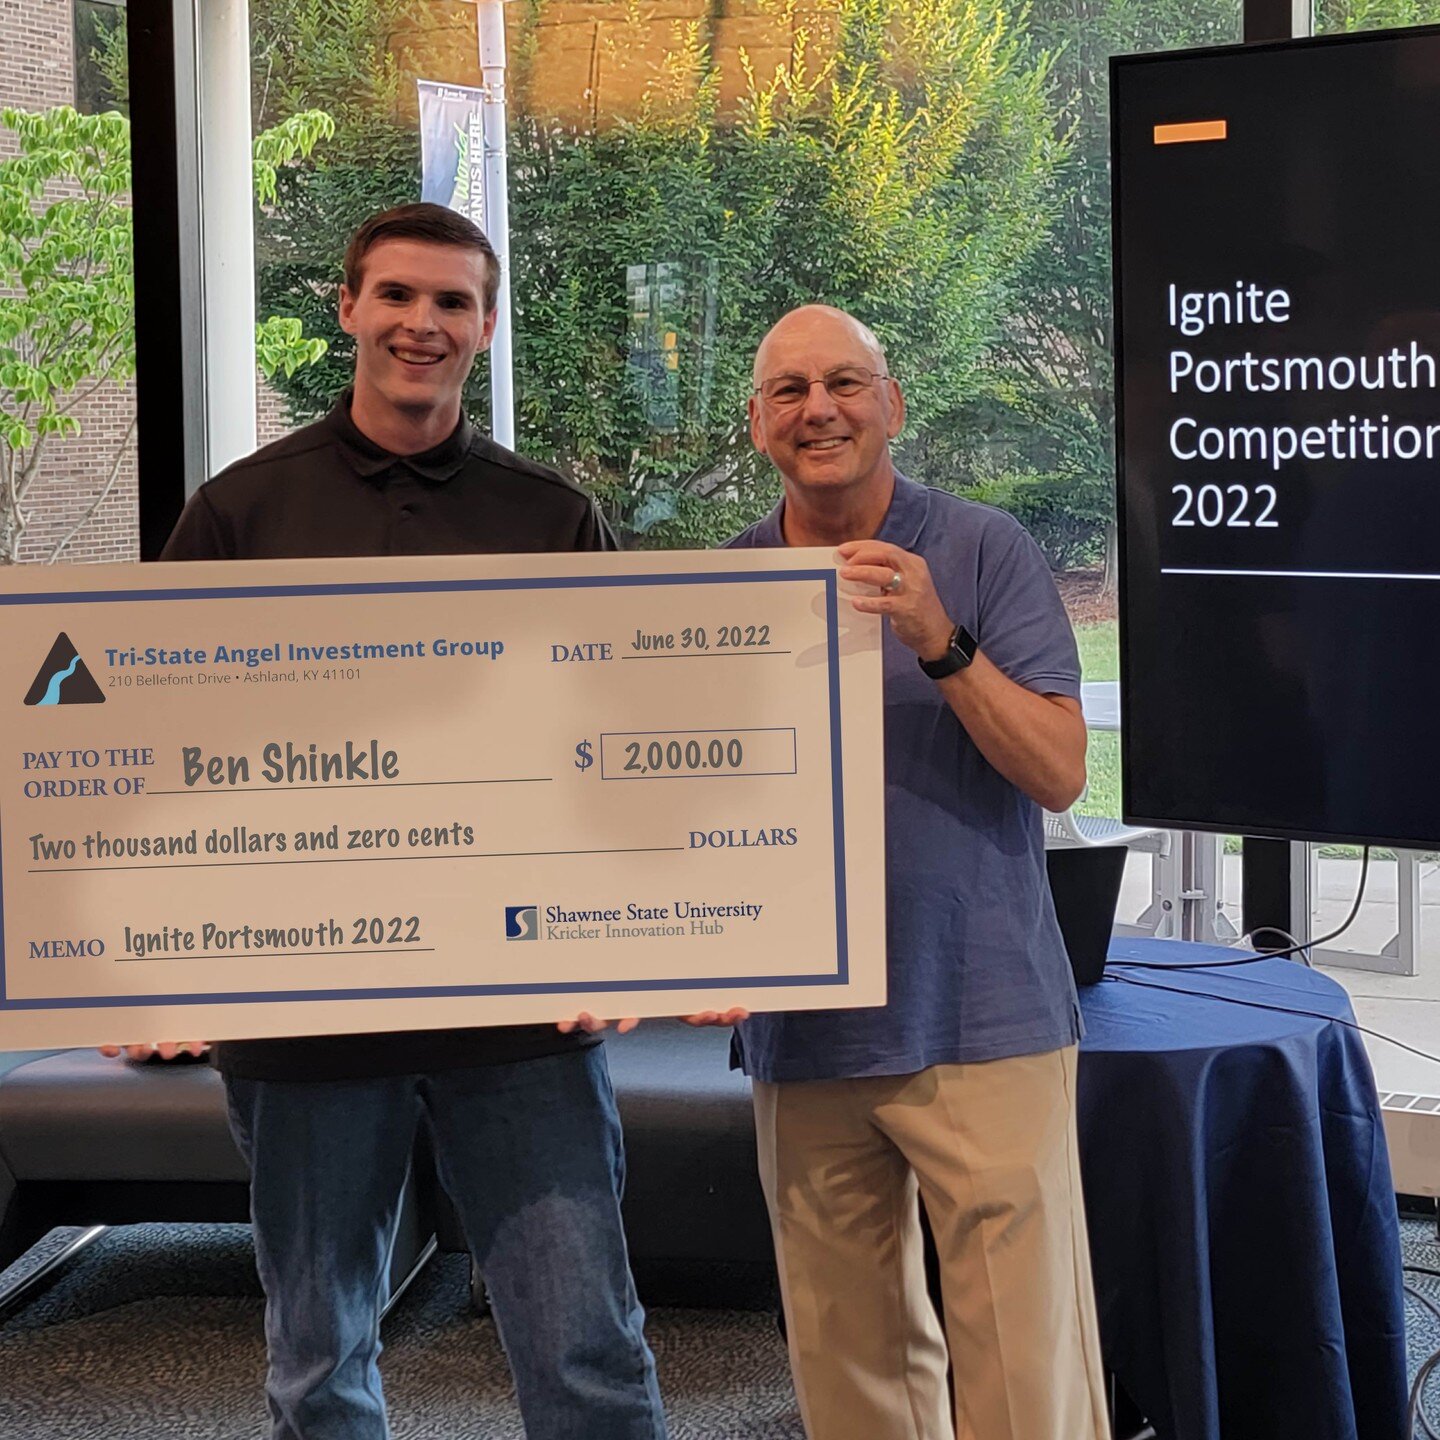 Congratulations to Ben Shinkle for taking home first place at the 2022 Ignite Portsmouth Pitch Competition! 👏

Ben received $2,000 in prize money for his business idea of wire and metal recycling. 

Thank you to the Tri-State Angel Investment Group 